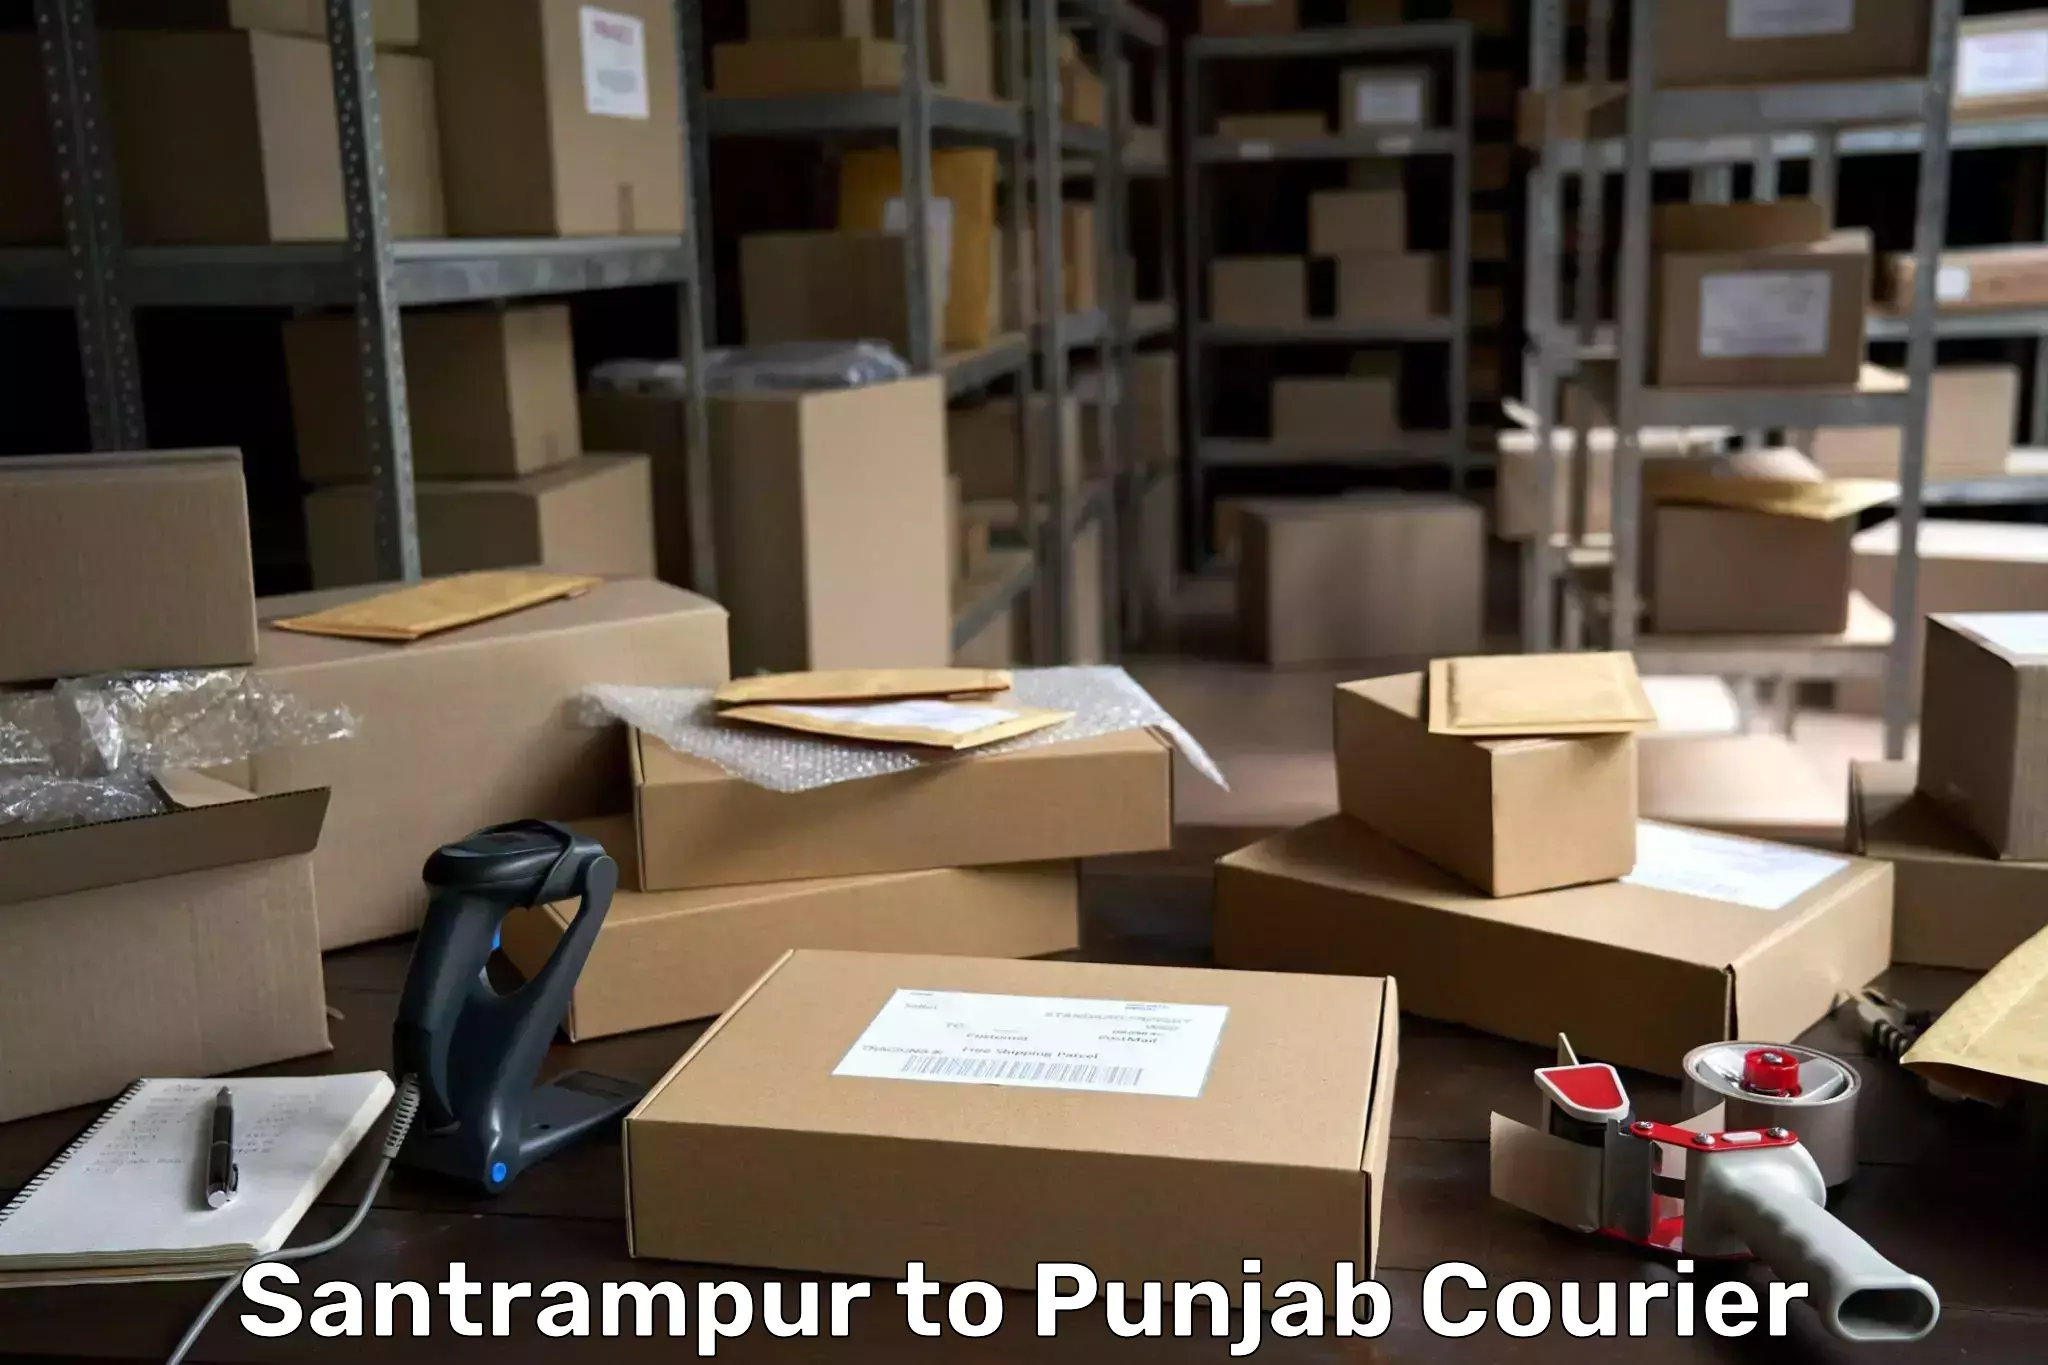 Express delivery network Santrampur to Punjab